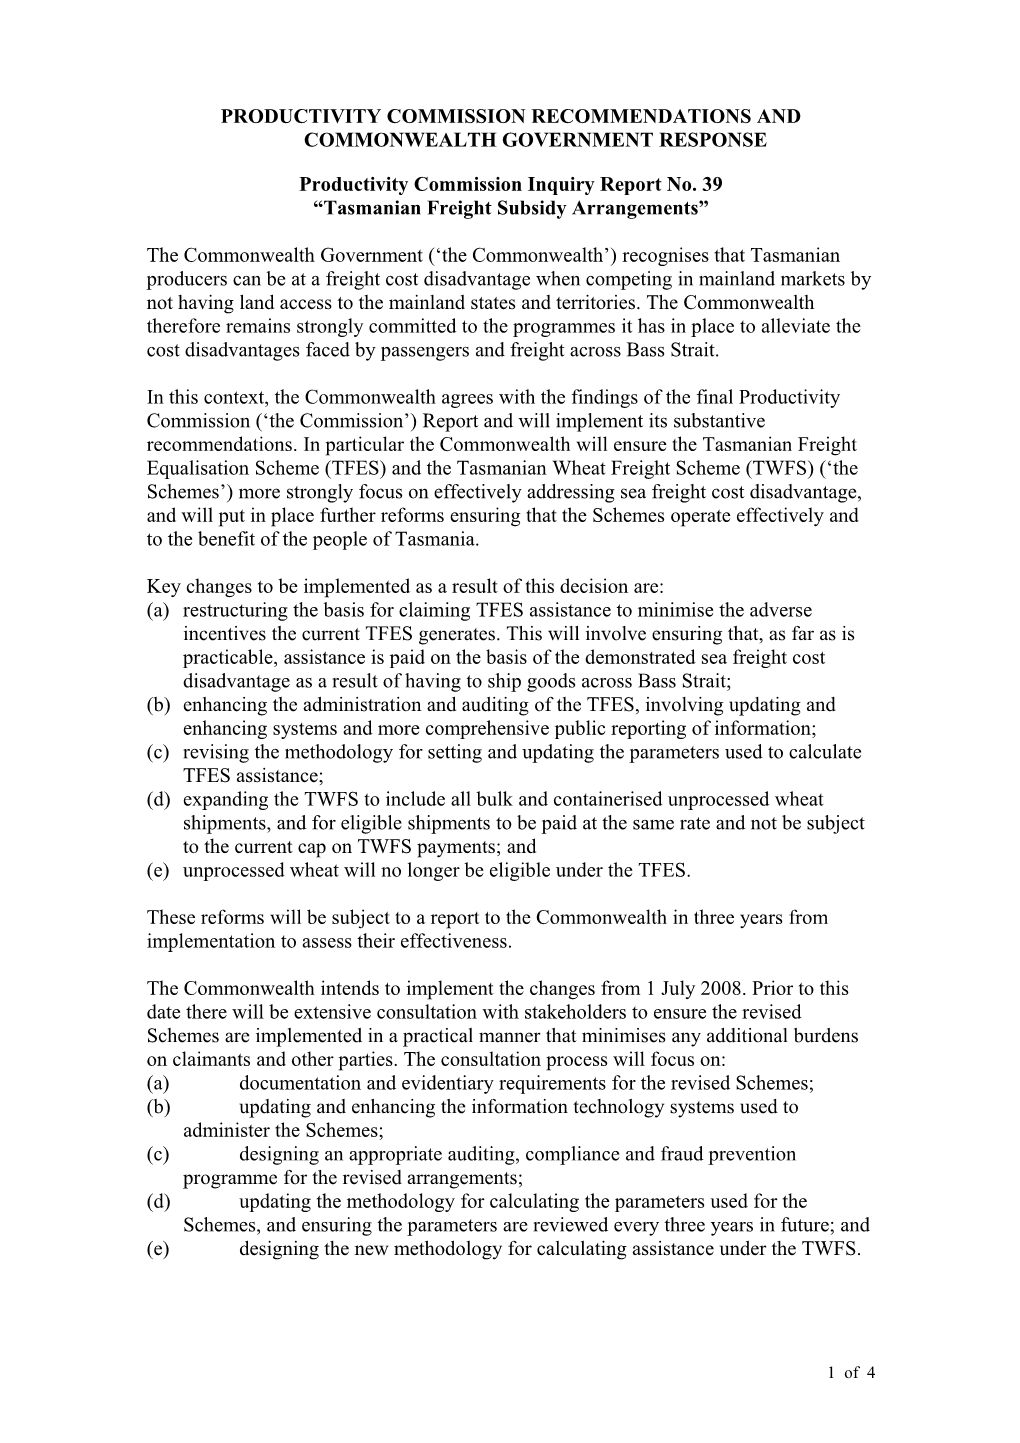 Productivity Commission Recommendations and Commonwealth Government Response